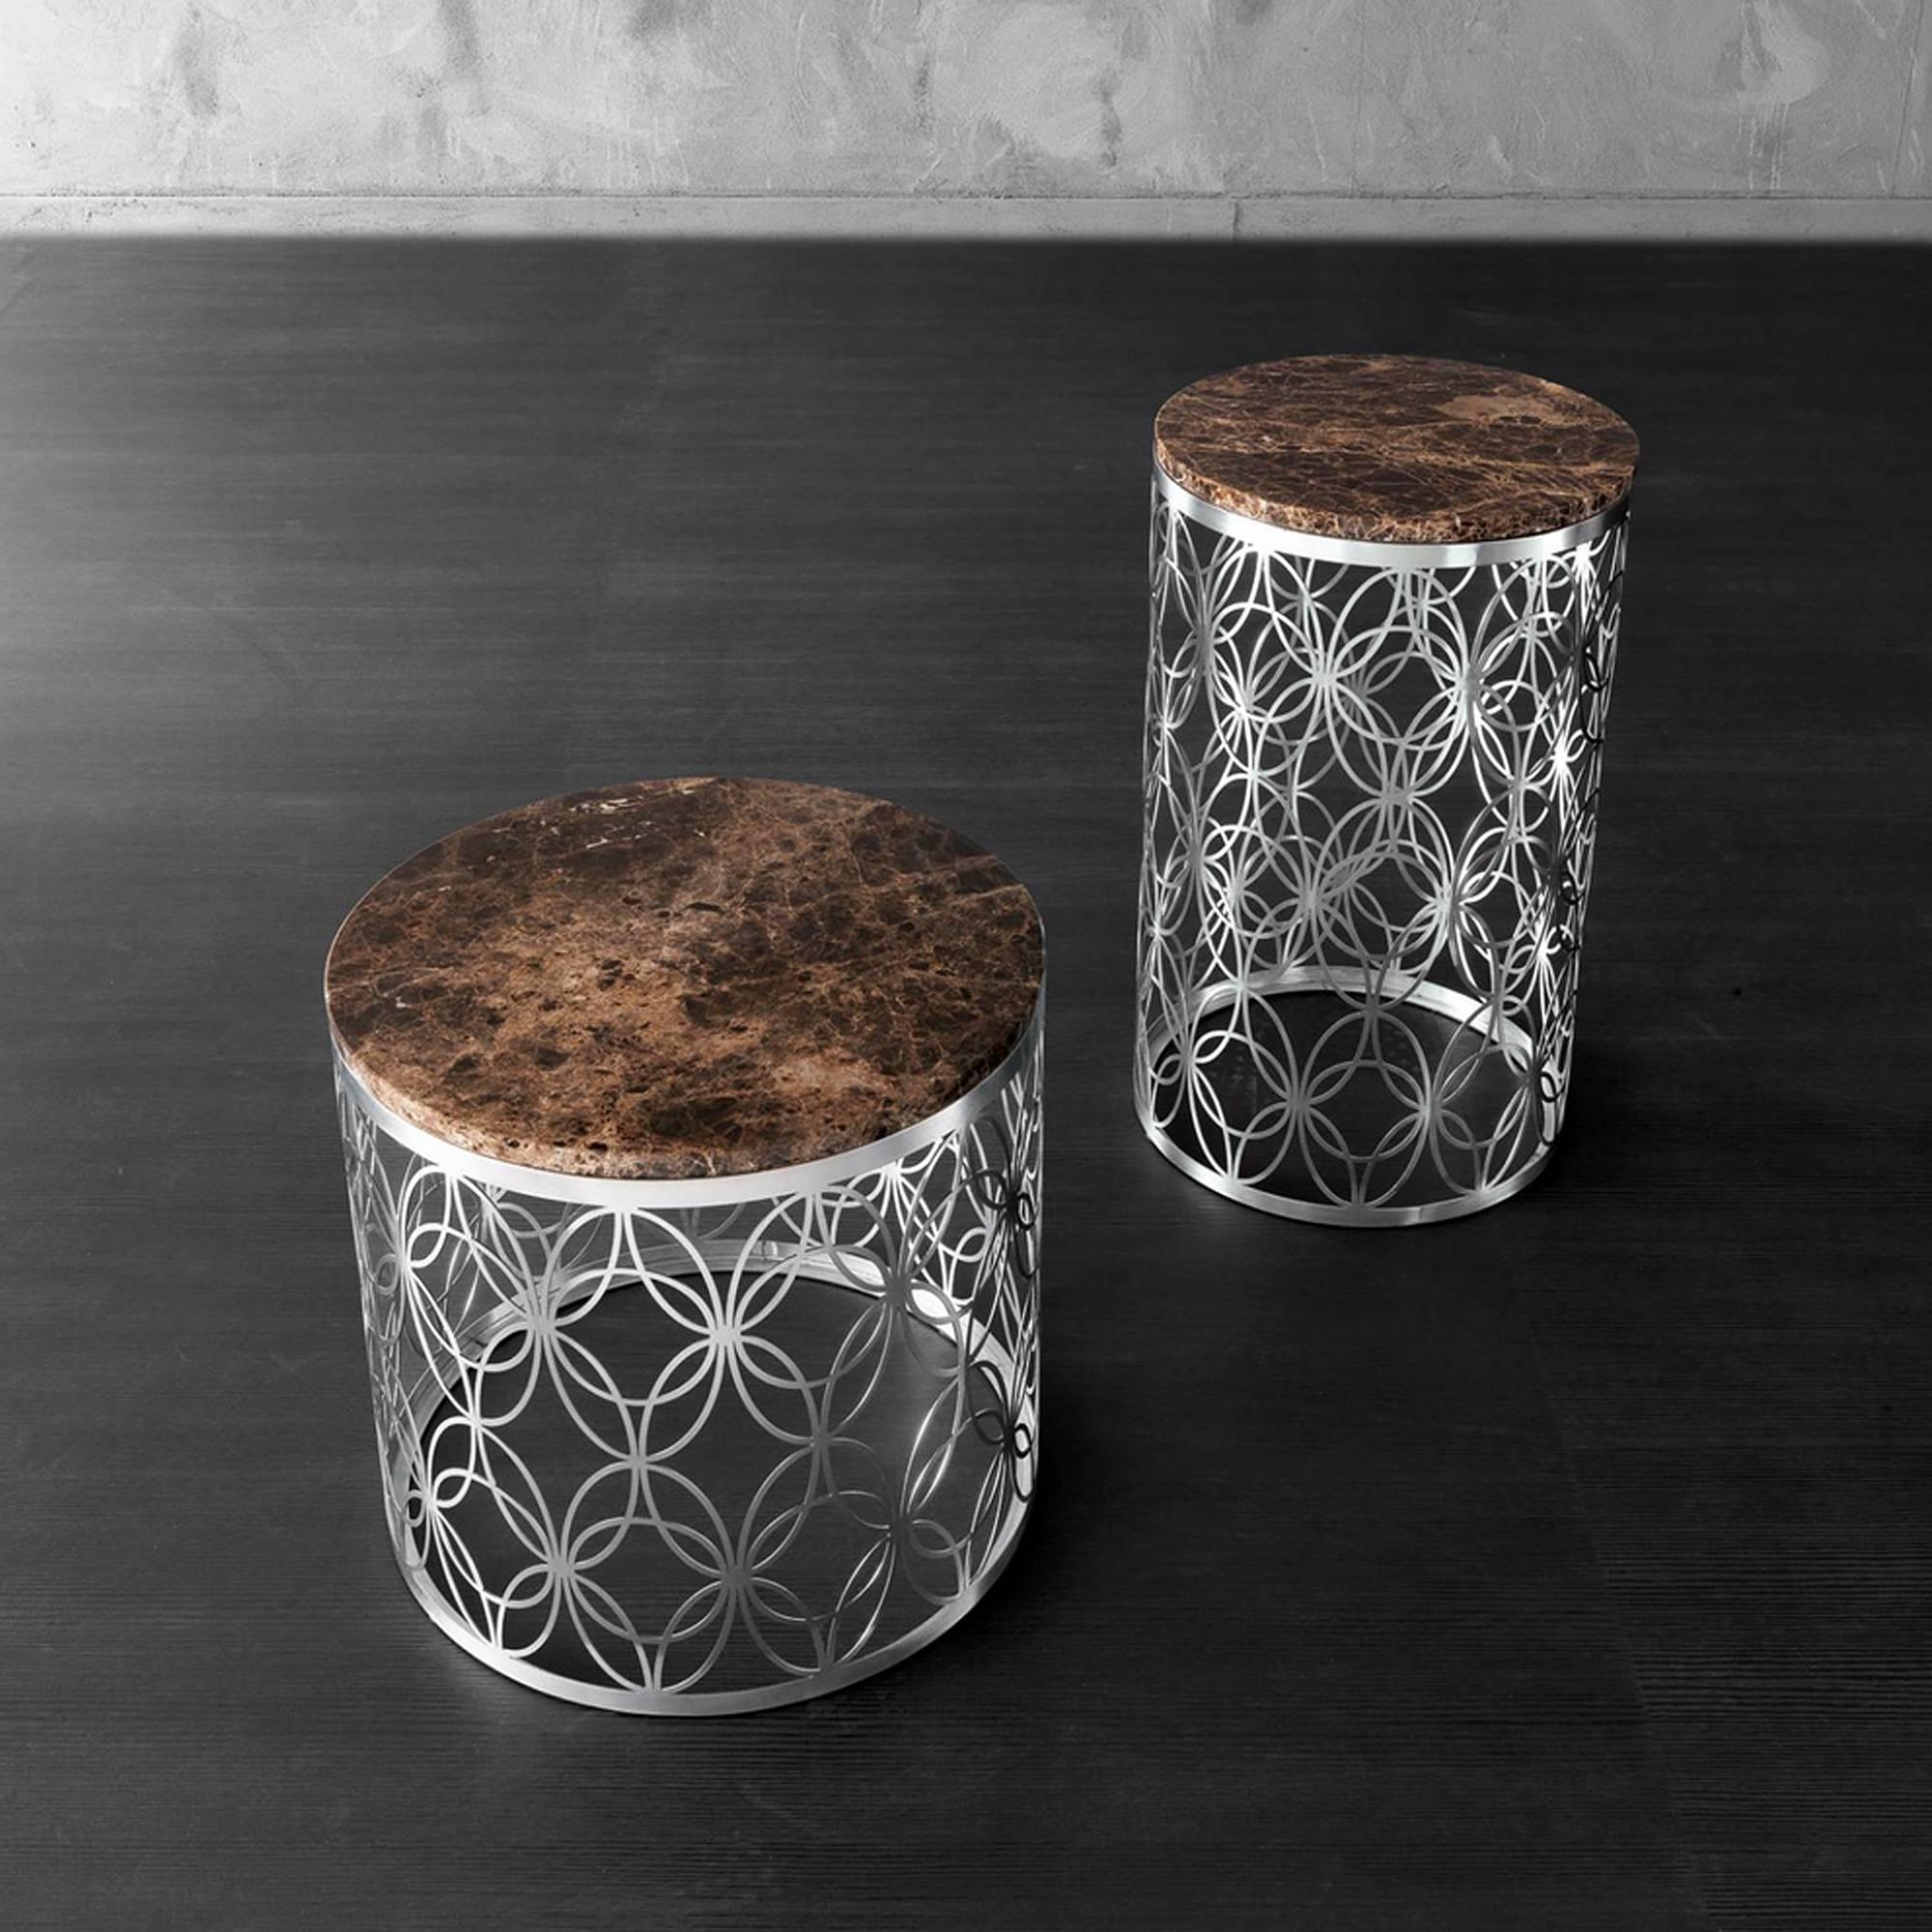 Side table Arnold with handcrafted stainless
steel structure and marble top. Available with
black glass top or white glass, price: 2900,00€.
Also available in Ø 40 x H 65 cm, price 3360,00€ or
with black glass top or with white glass top,
price: